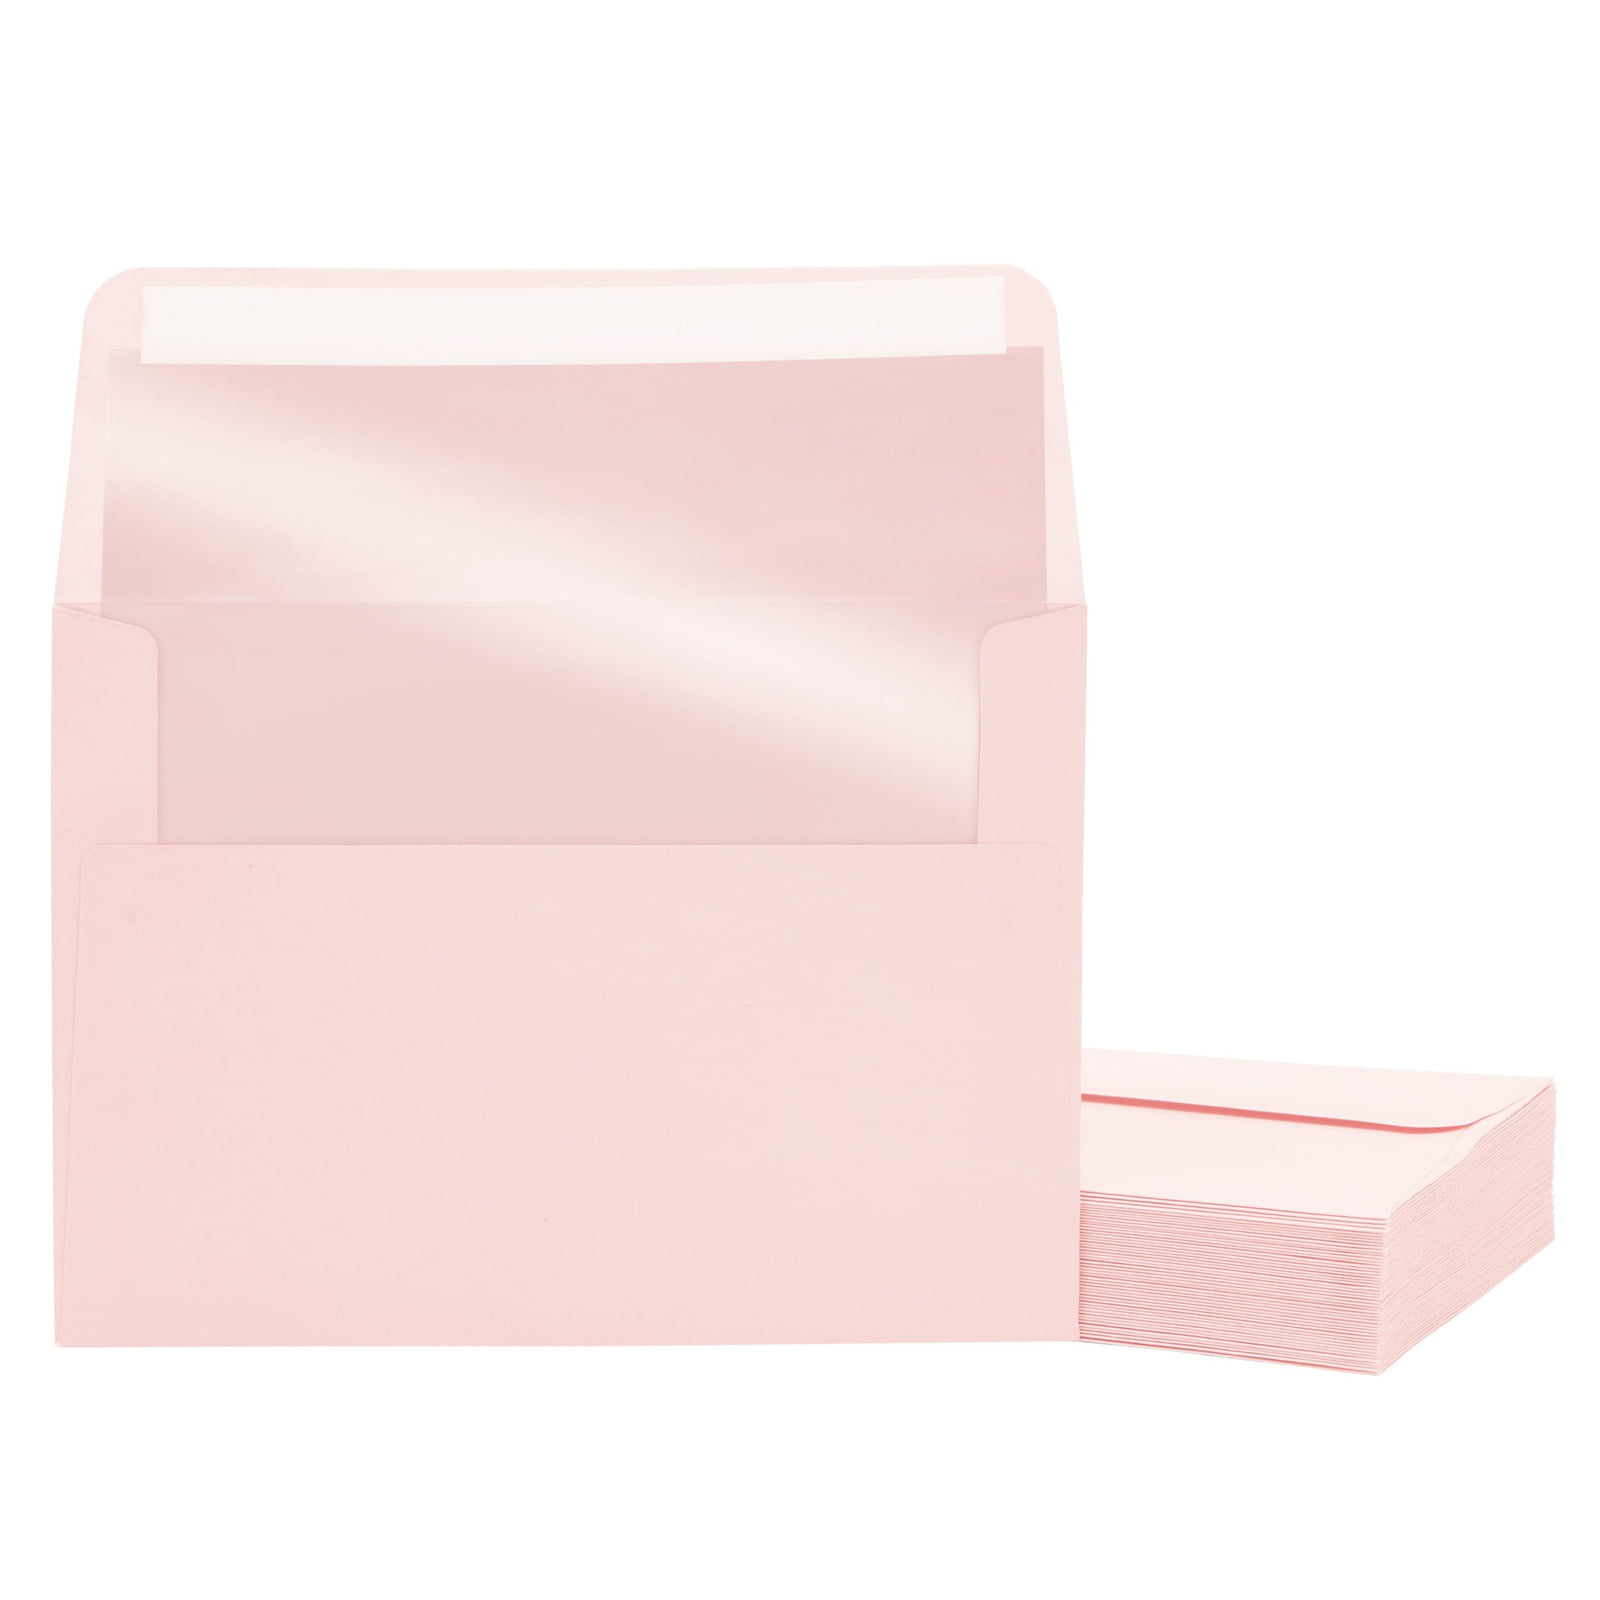 Peel Baby Shower - Perfect for Weddings Square Flap 110 5x7 Pink Invitation Envelopes Press & Self Seal 5 ¼ x 7 ¼ inches Graduation A7 - for 5x7 Cards 120 GSM 